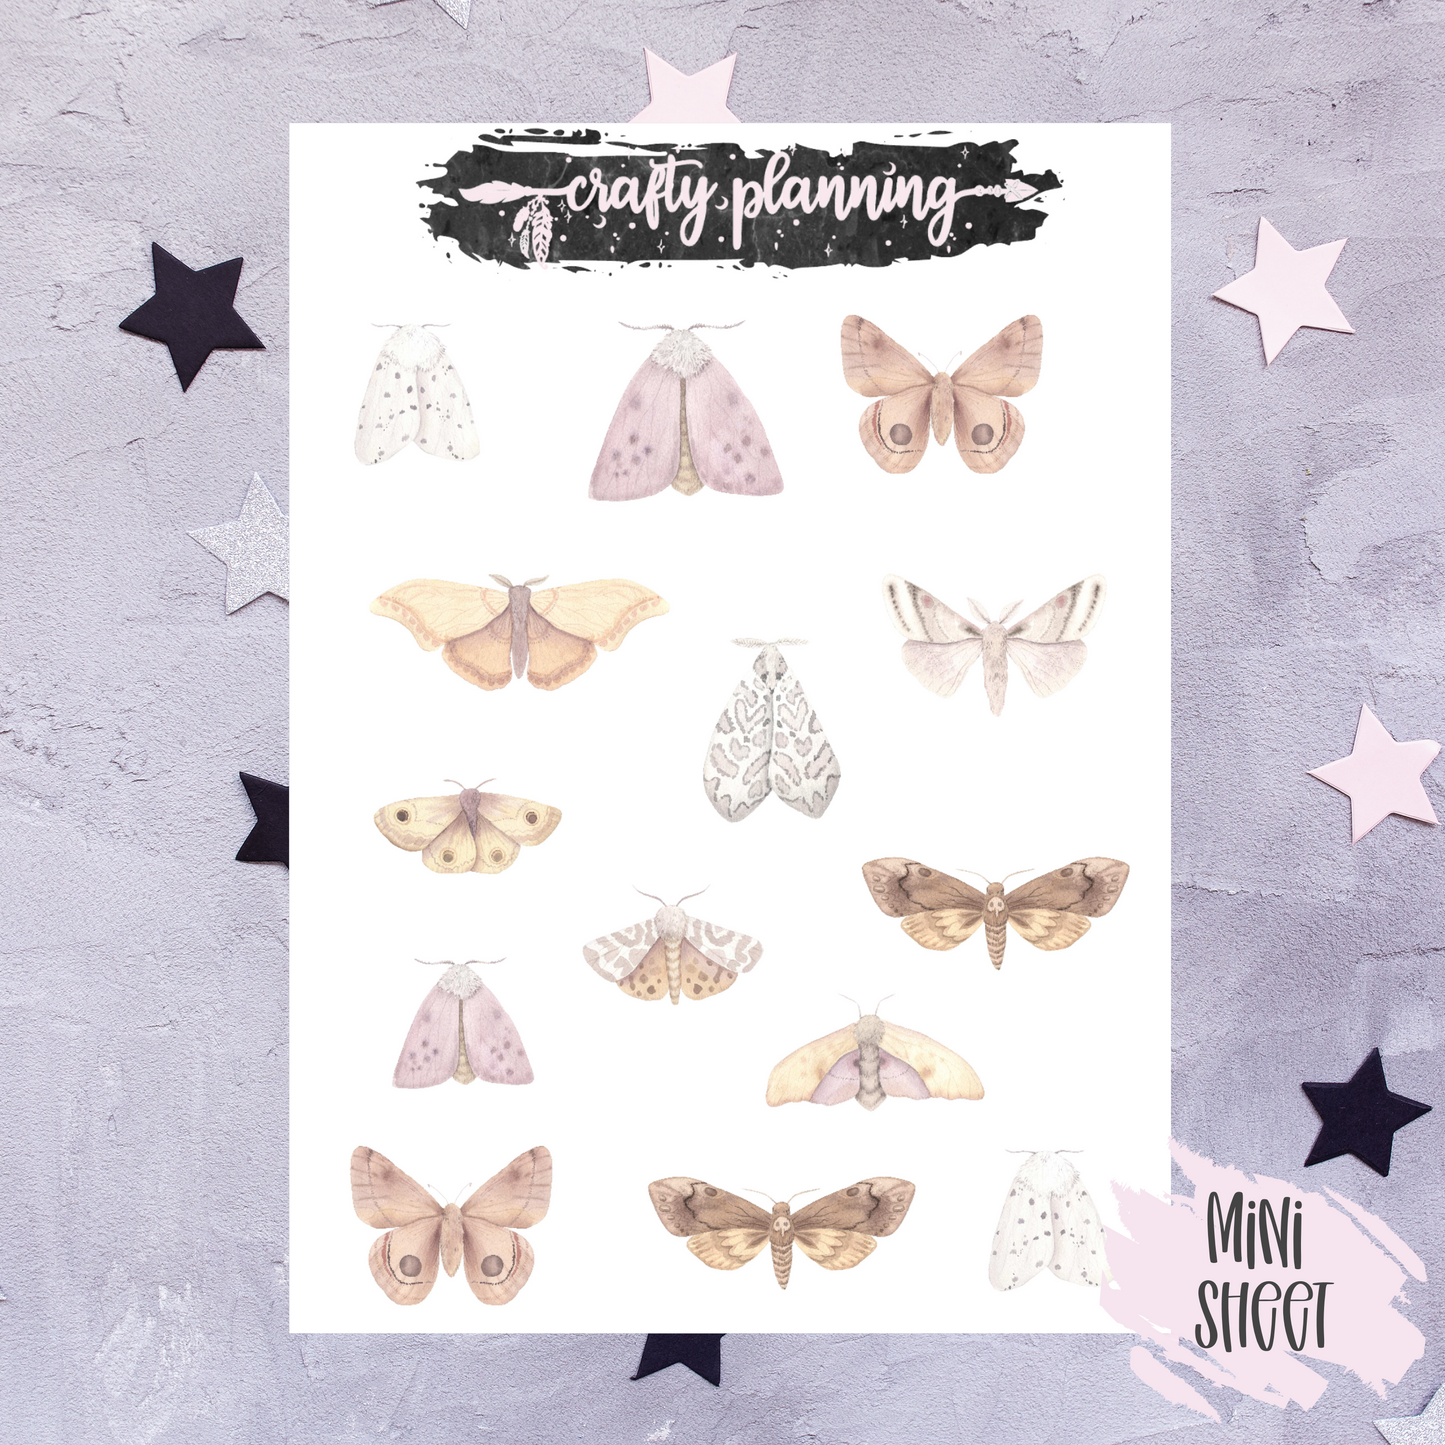 Watercolour Moth Stickers, Witch Stickers, Wiccan Stickers, Pagan Stickers, Magical Sticker Sheet, Grimoire,Book Of Shadows,Journal Stickers